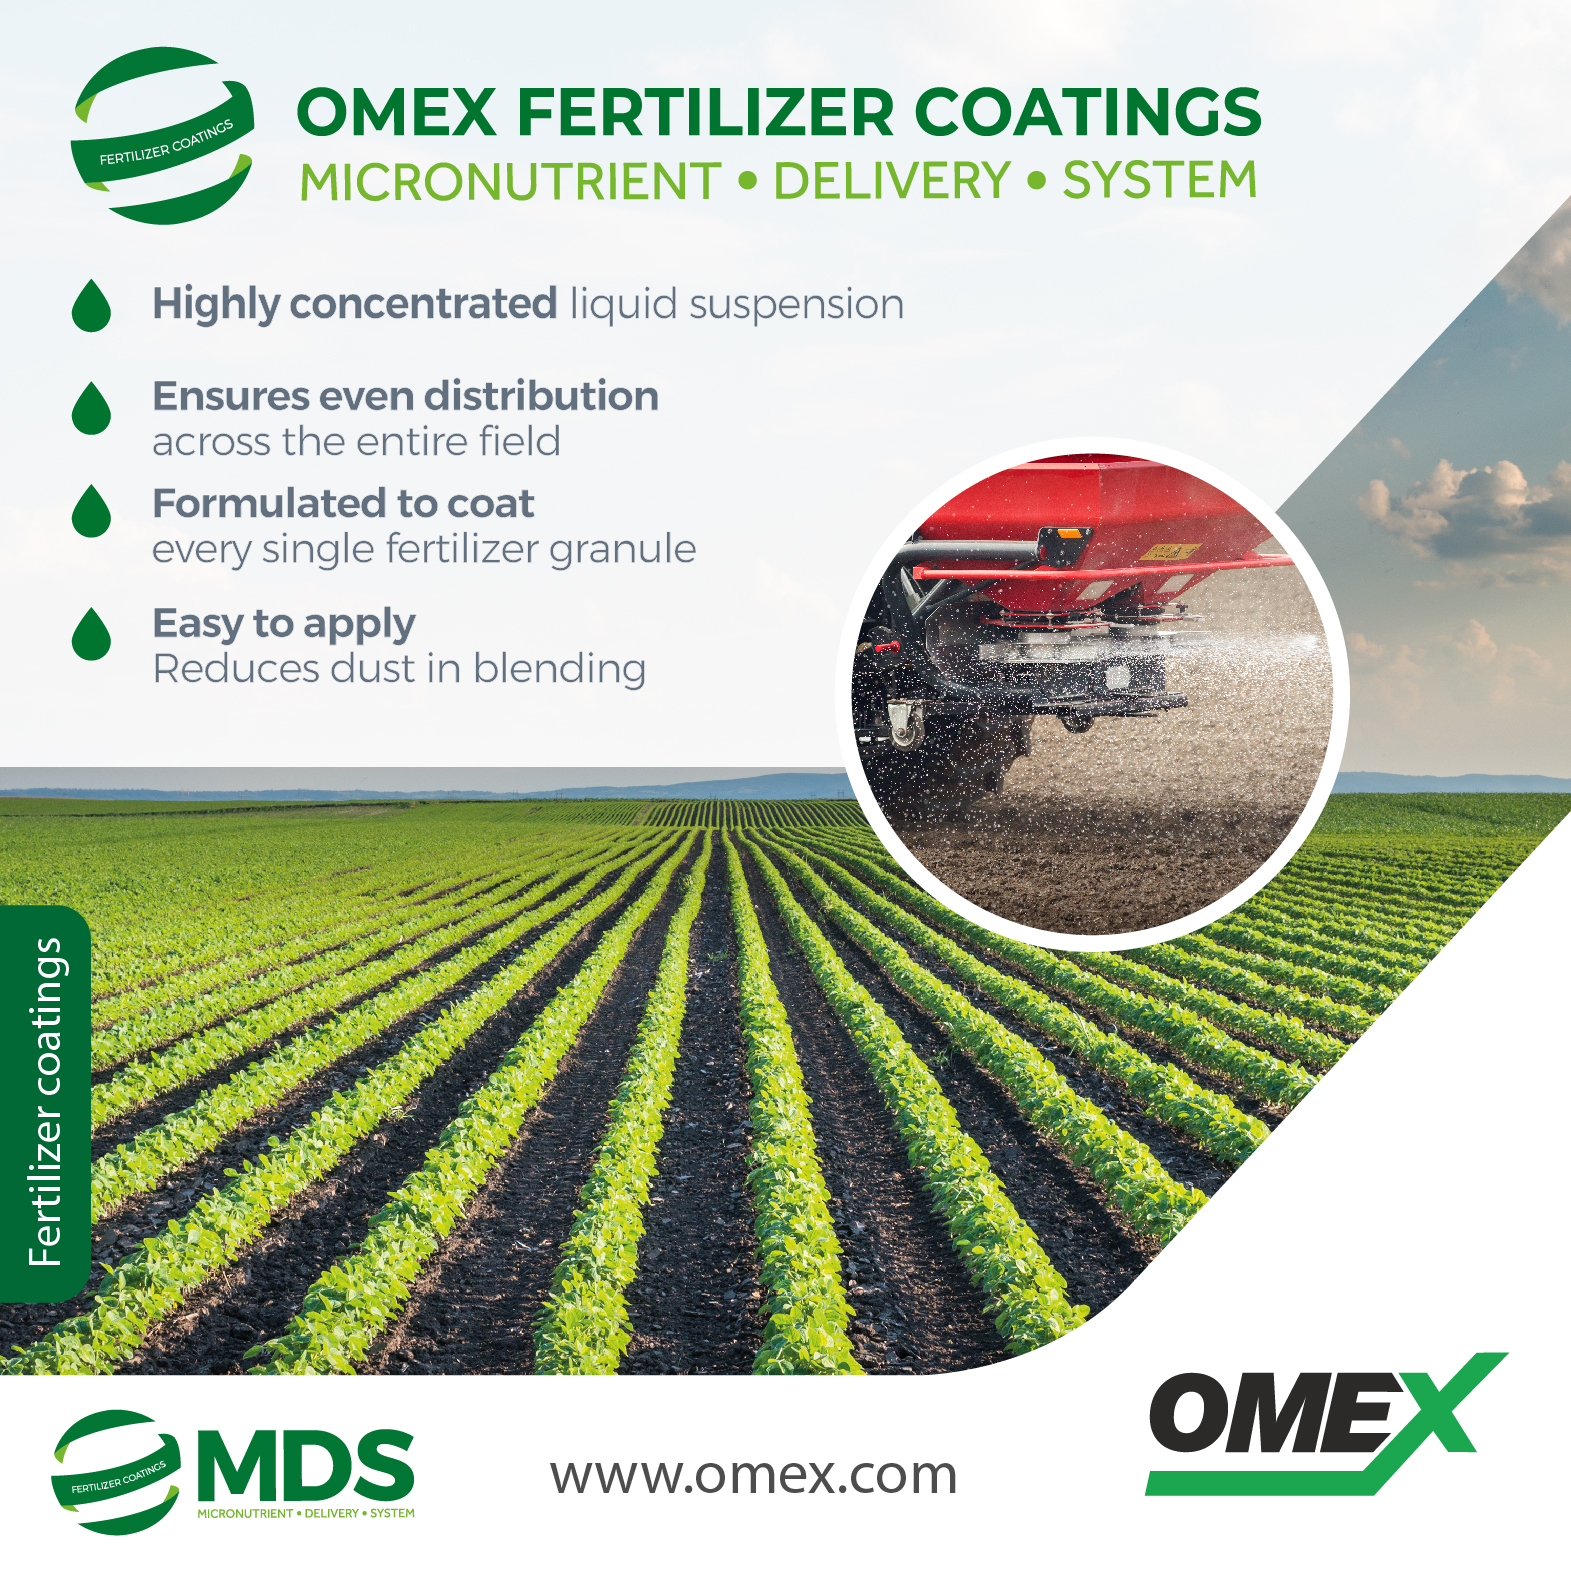 Help maximise crop yields with OMEX MDS